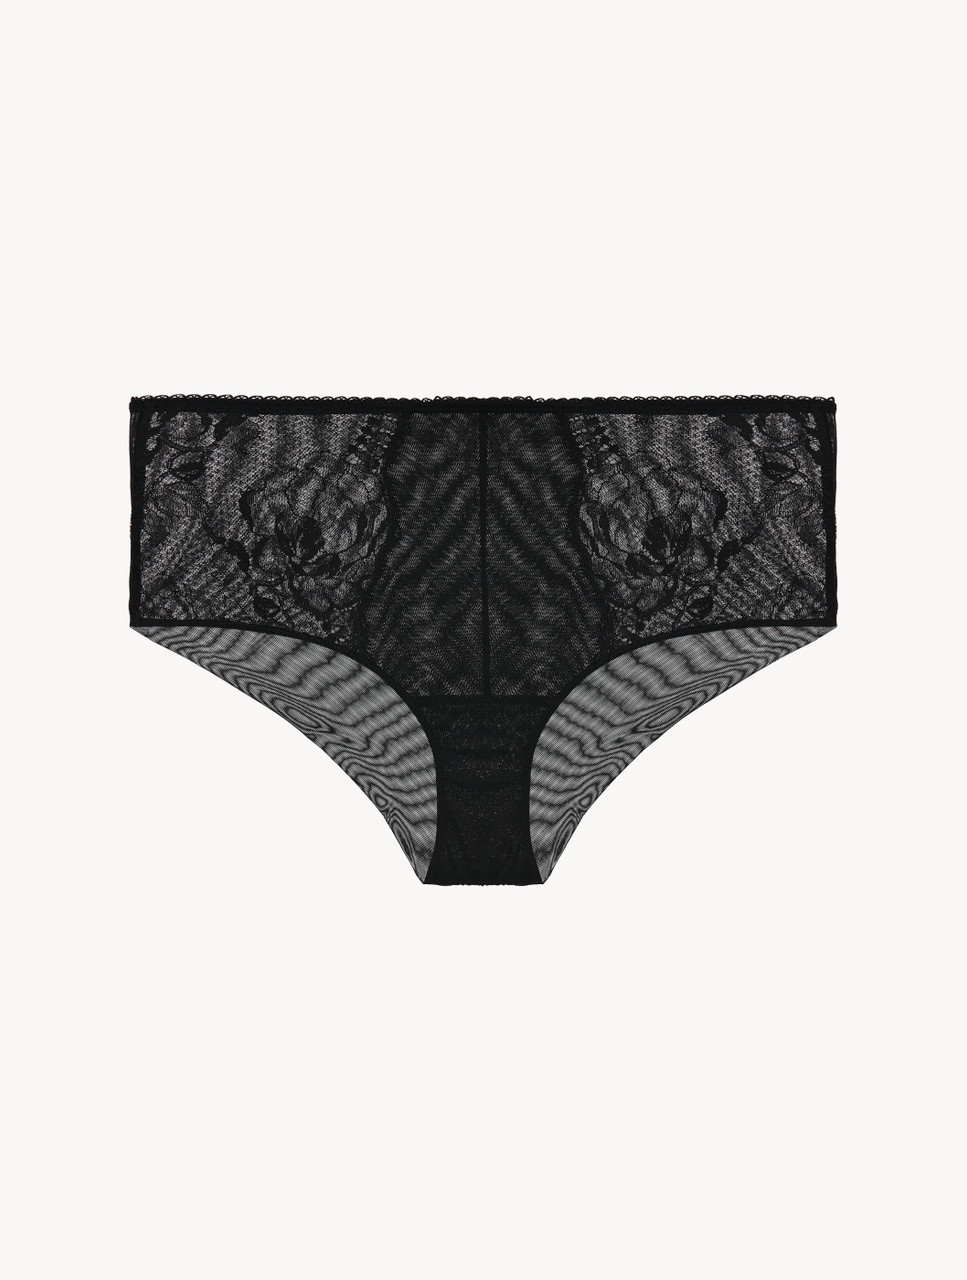 Black lace high-waisted brief